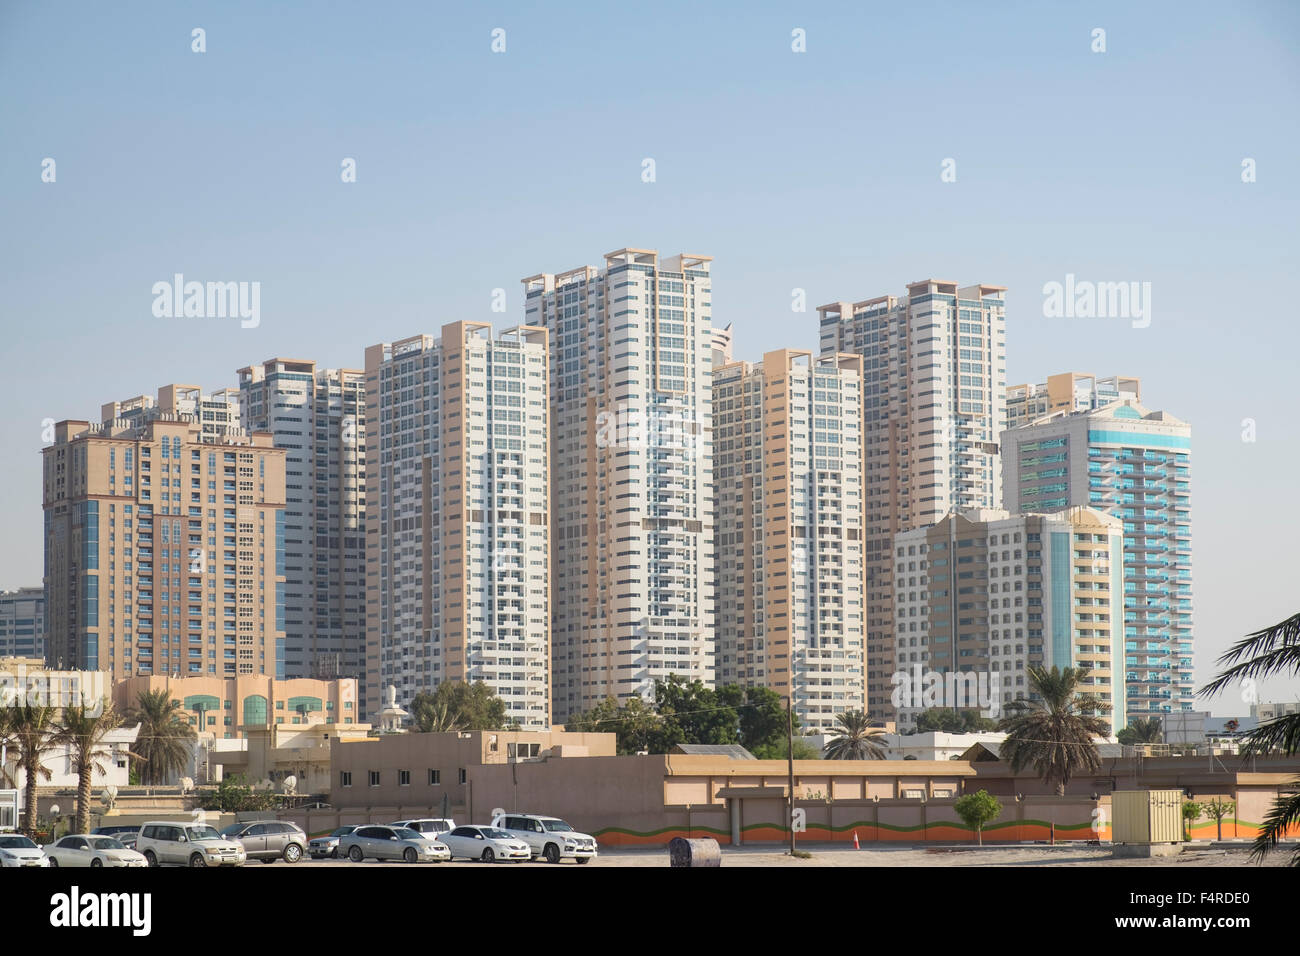 View of modern high-rise residential apartment blocks in Ajman Emirate in United Arab Emirates Stock Photo